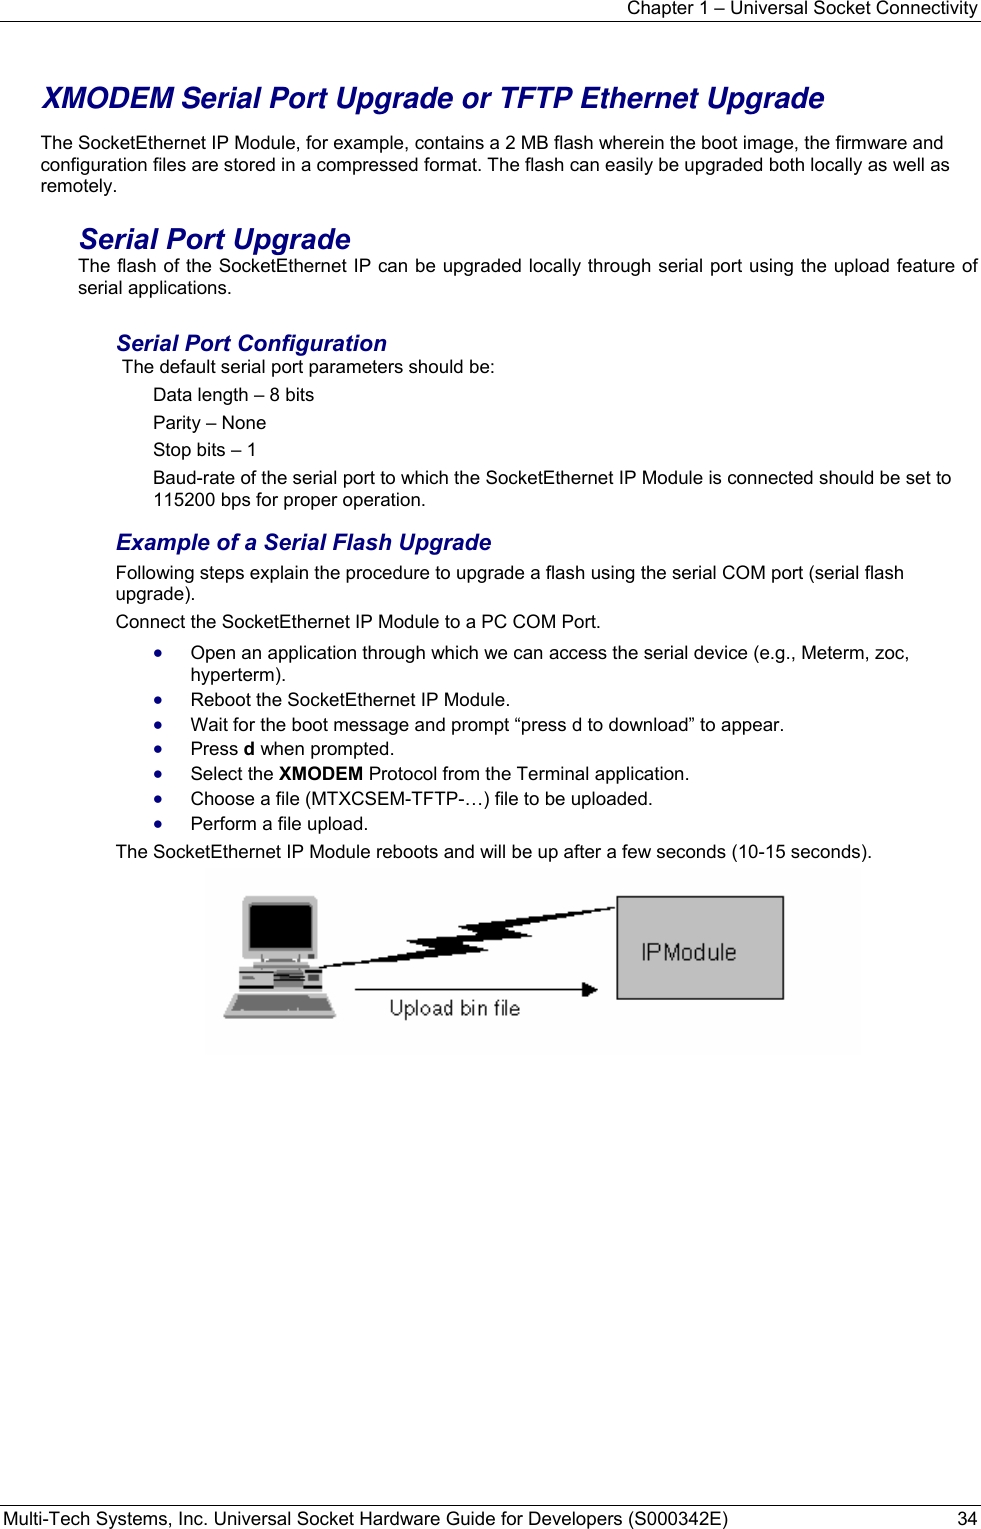 Chapter 1 – Universal Socket Connectivity Multi-Tech Systems, Inc. Universal Socket Hardware Guide for Developers (S000342E)  34   XMODEM Serial Port Upgrade or TFTP Ethernet Upgrade  The SocketEthernet IP Module, for example, contains a 2 MB flash wherein the boot image, the firmware and configuration files are stored in a compressed format. The flash can easily be upgraded both locally as well as remotely. Serial Port Upgrade The flash of the SocketEthernet IP can be upgraded locally through serial port using the upload feature of serial applications. Serial Port Configuration  The default serial port parameters should be: Data length – 8 bits Parity – None Stop bits – 1 Baud-rate of the serial port to which the SocketEthernet IP Module is connected should be set to 115200 bps for proper operation. Example of a Serial Flash Upgrade Following steps explain the procedure to upgrade a flash using the serial COM port (serial flash upgrade). Connect the SocketEthernet IP Module to a PC COM Port. • Open an application through which we can access the serial device (e.g., Meterm, zoc, hyperterm). • Reboot the SocketEthernet IP Module. • Wait for the boot message and prompt “press d to download” to appear. • Press d when prompted. • Select the XMODEM Protocol from the Terminal application.  • Choose a file (MTXCSEM-TFTP-…) file to be uploaded. • Perform a file upload. The SocketEthernet IP Module reboots and will be up after a few seconds (10-15 seconds).   